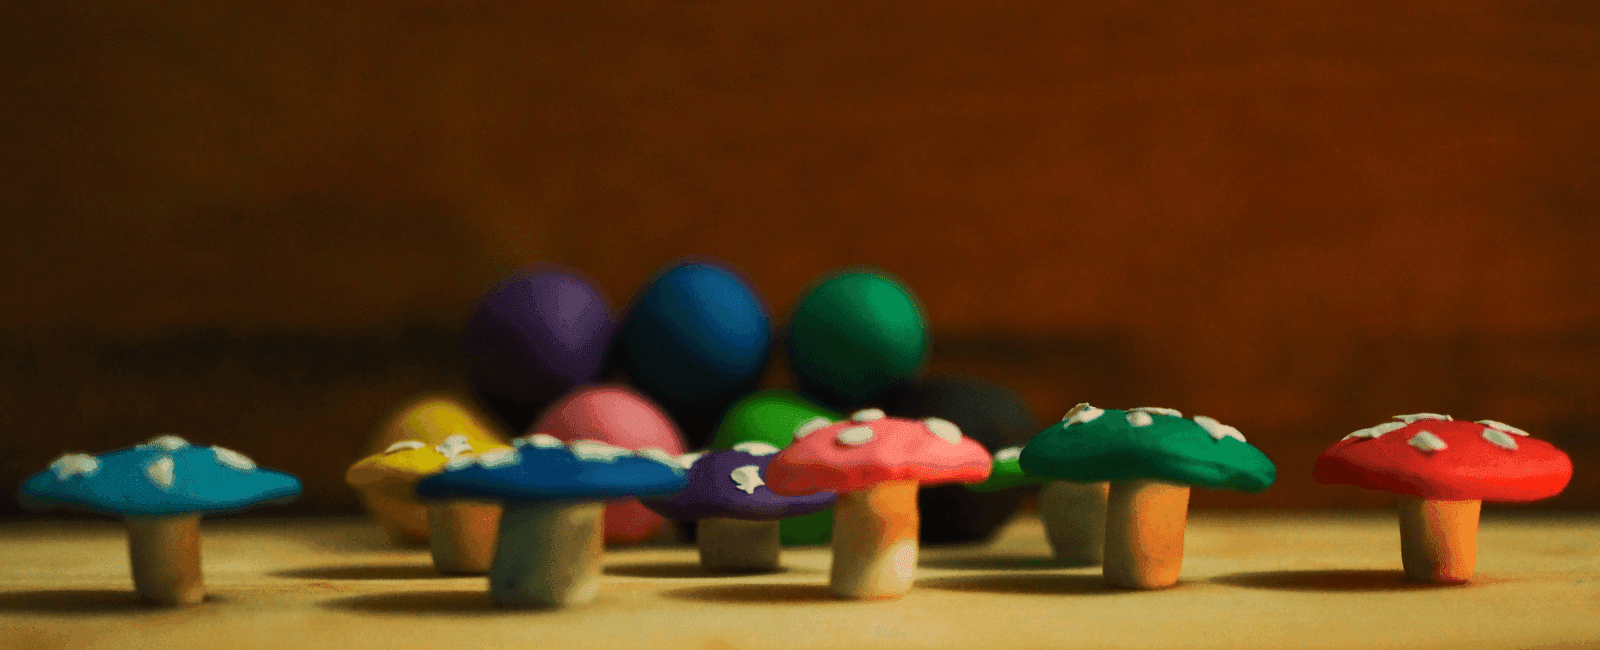 5 Unique Clay Mushroom DIY Projects (That Anyone Can Make!)